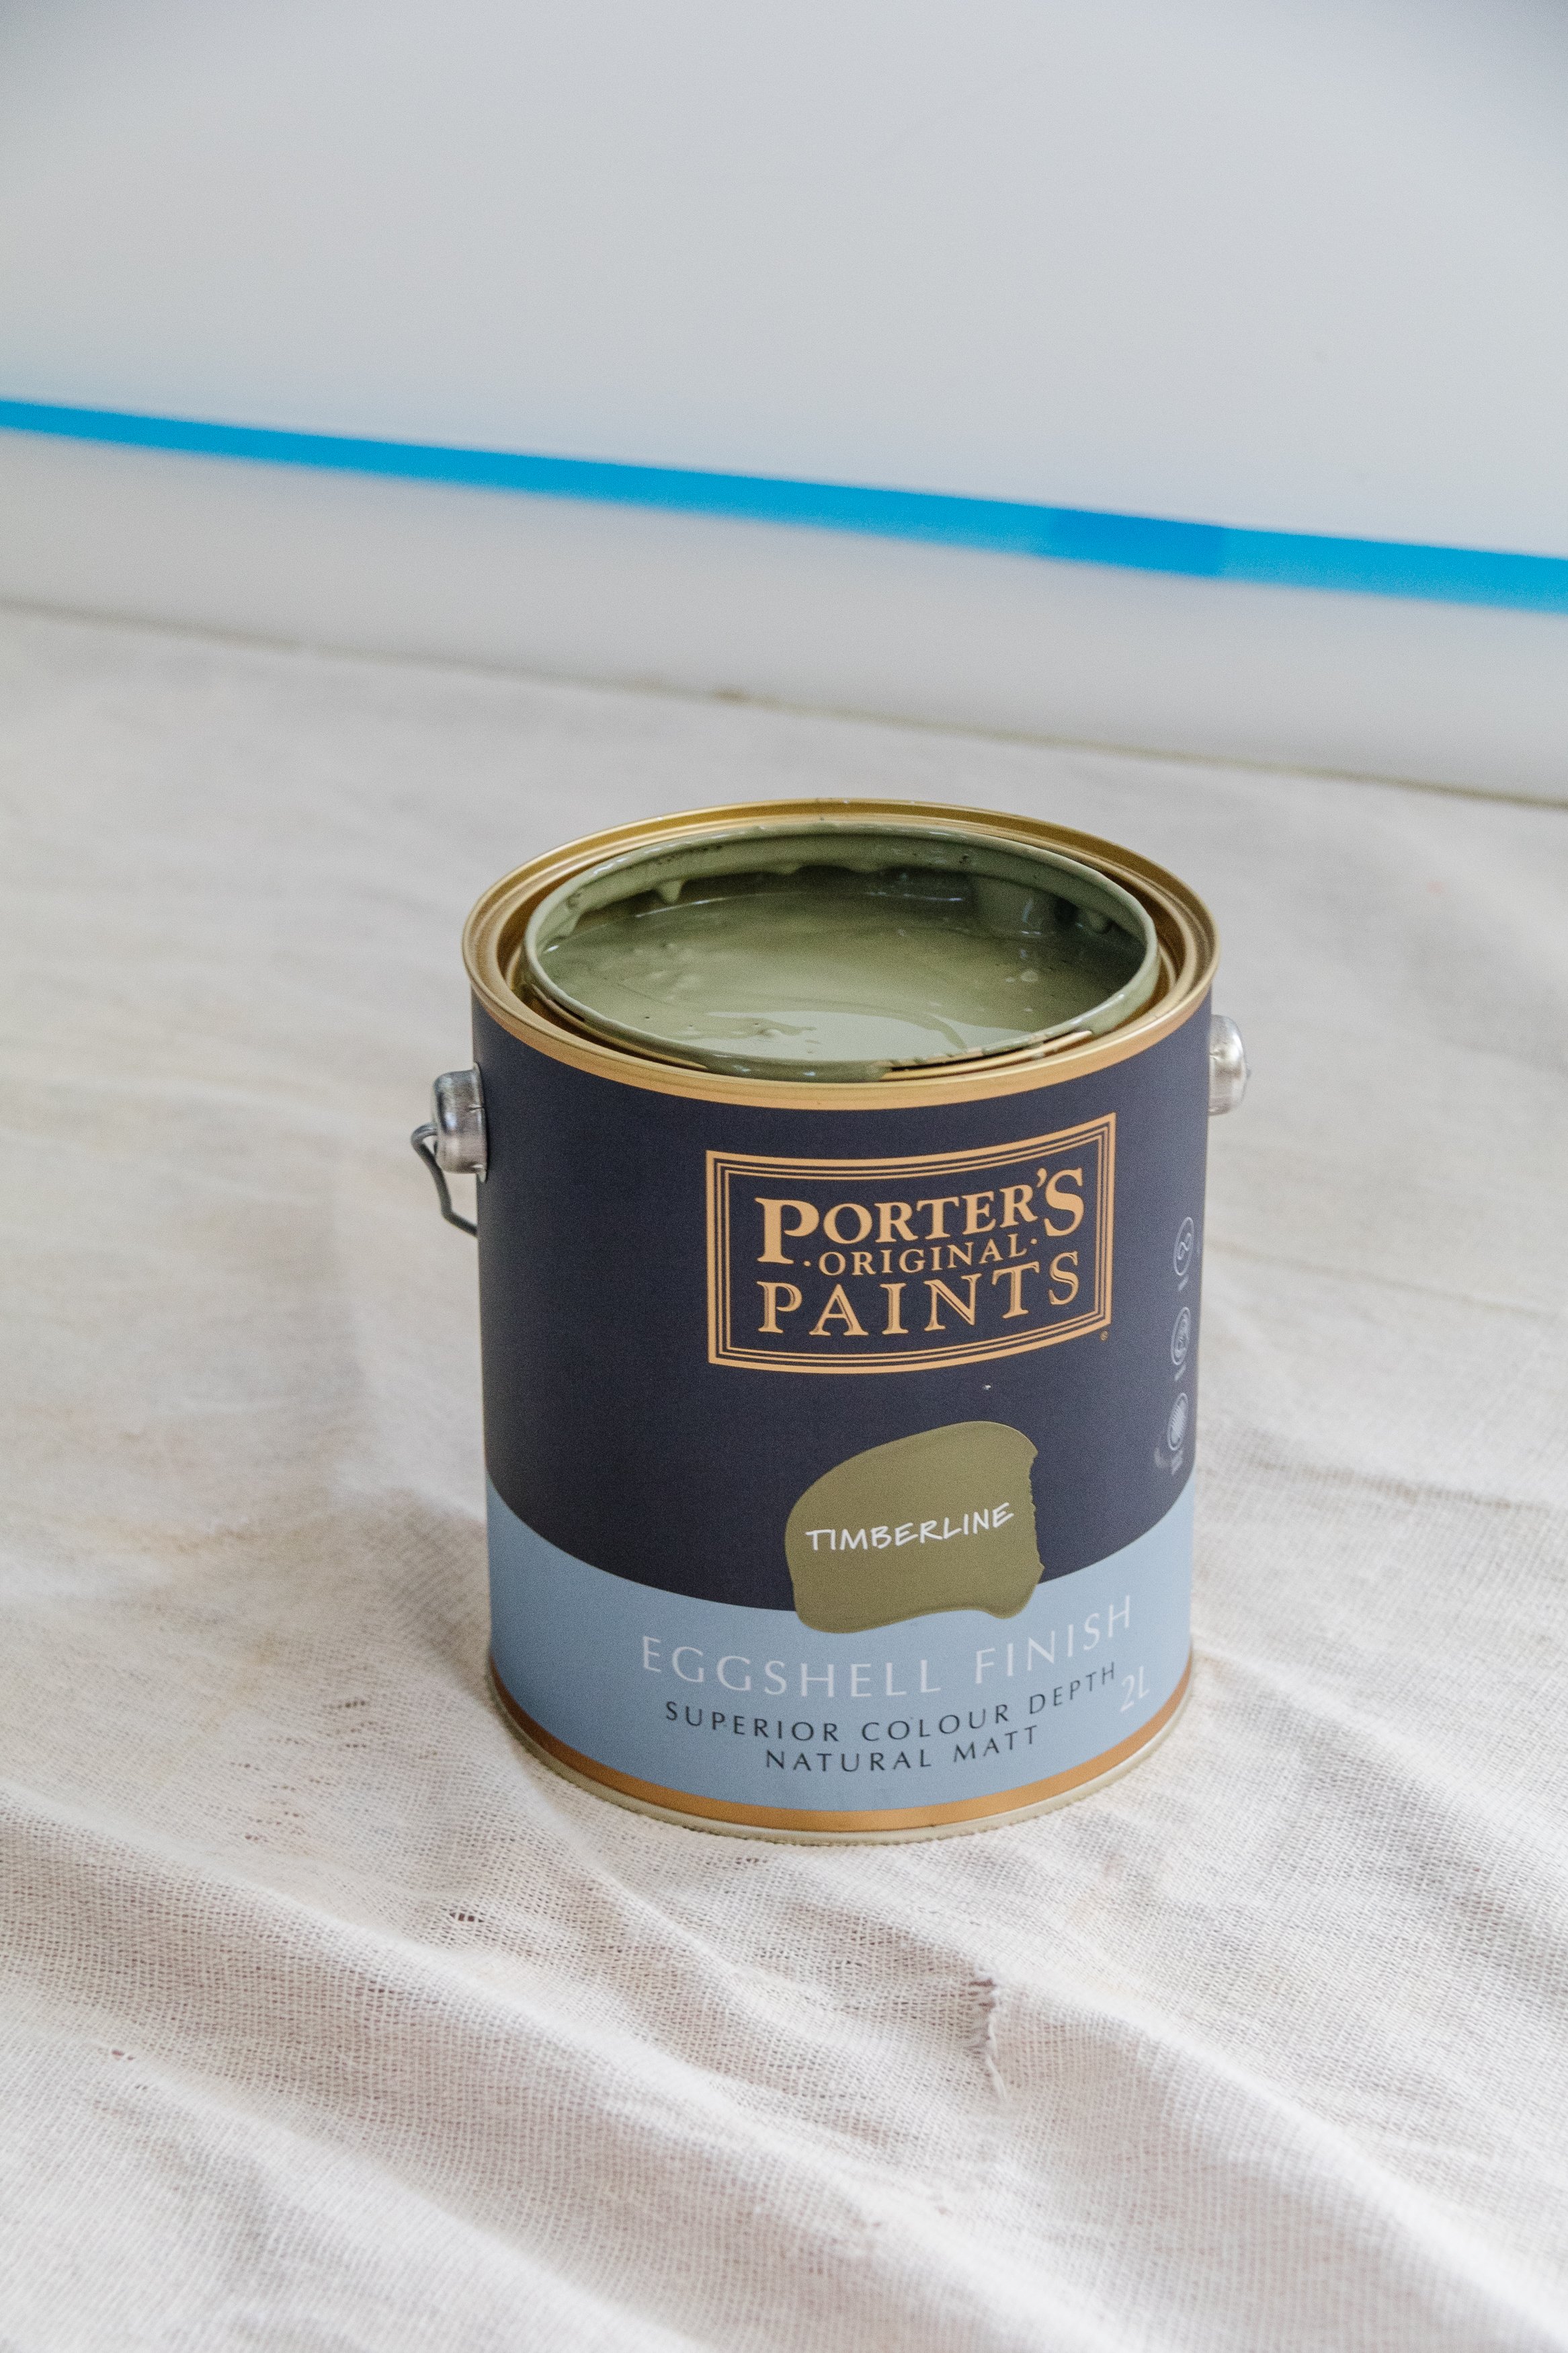 Bedroom Makeover With Porter's Paints_Smor Home (26 of 62).jpg